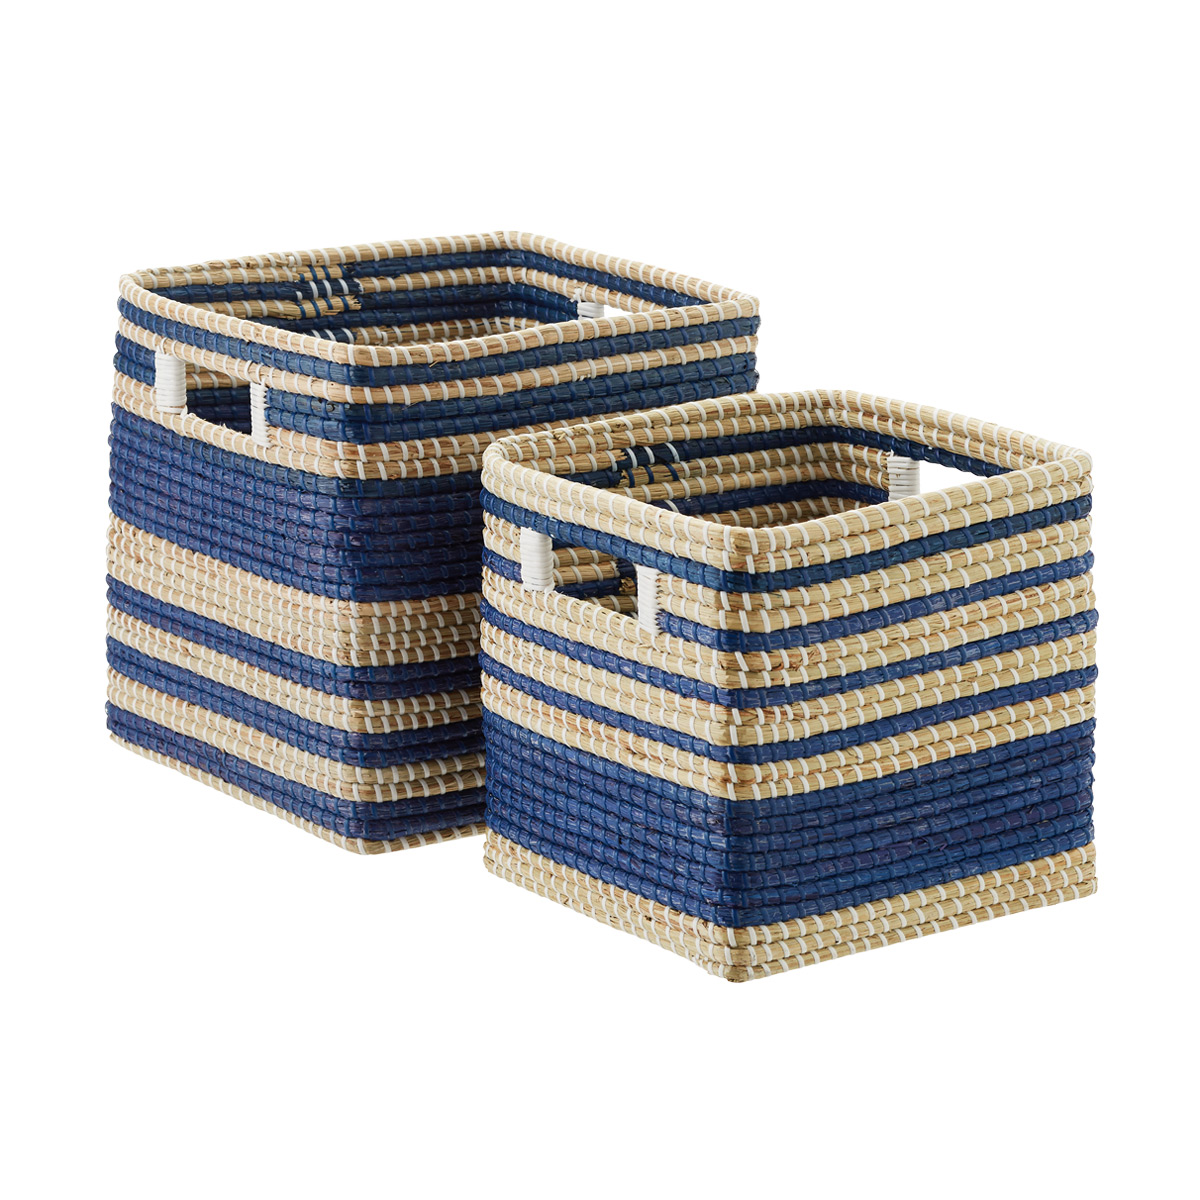 JVL Natural Seagrass Square Storage Baskets With Inset Handles Set of 3 for sale online 